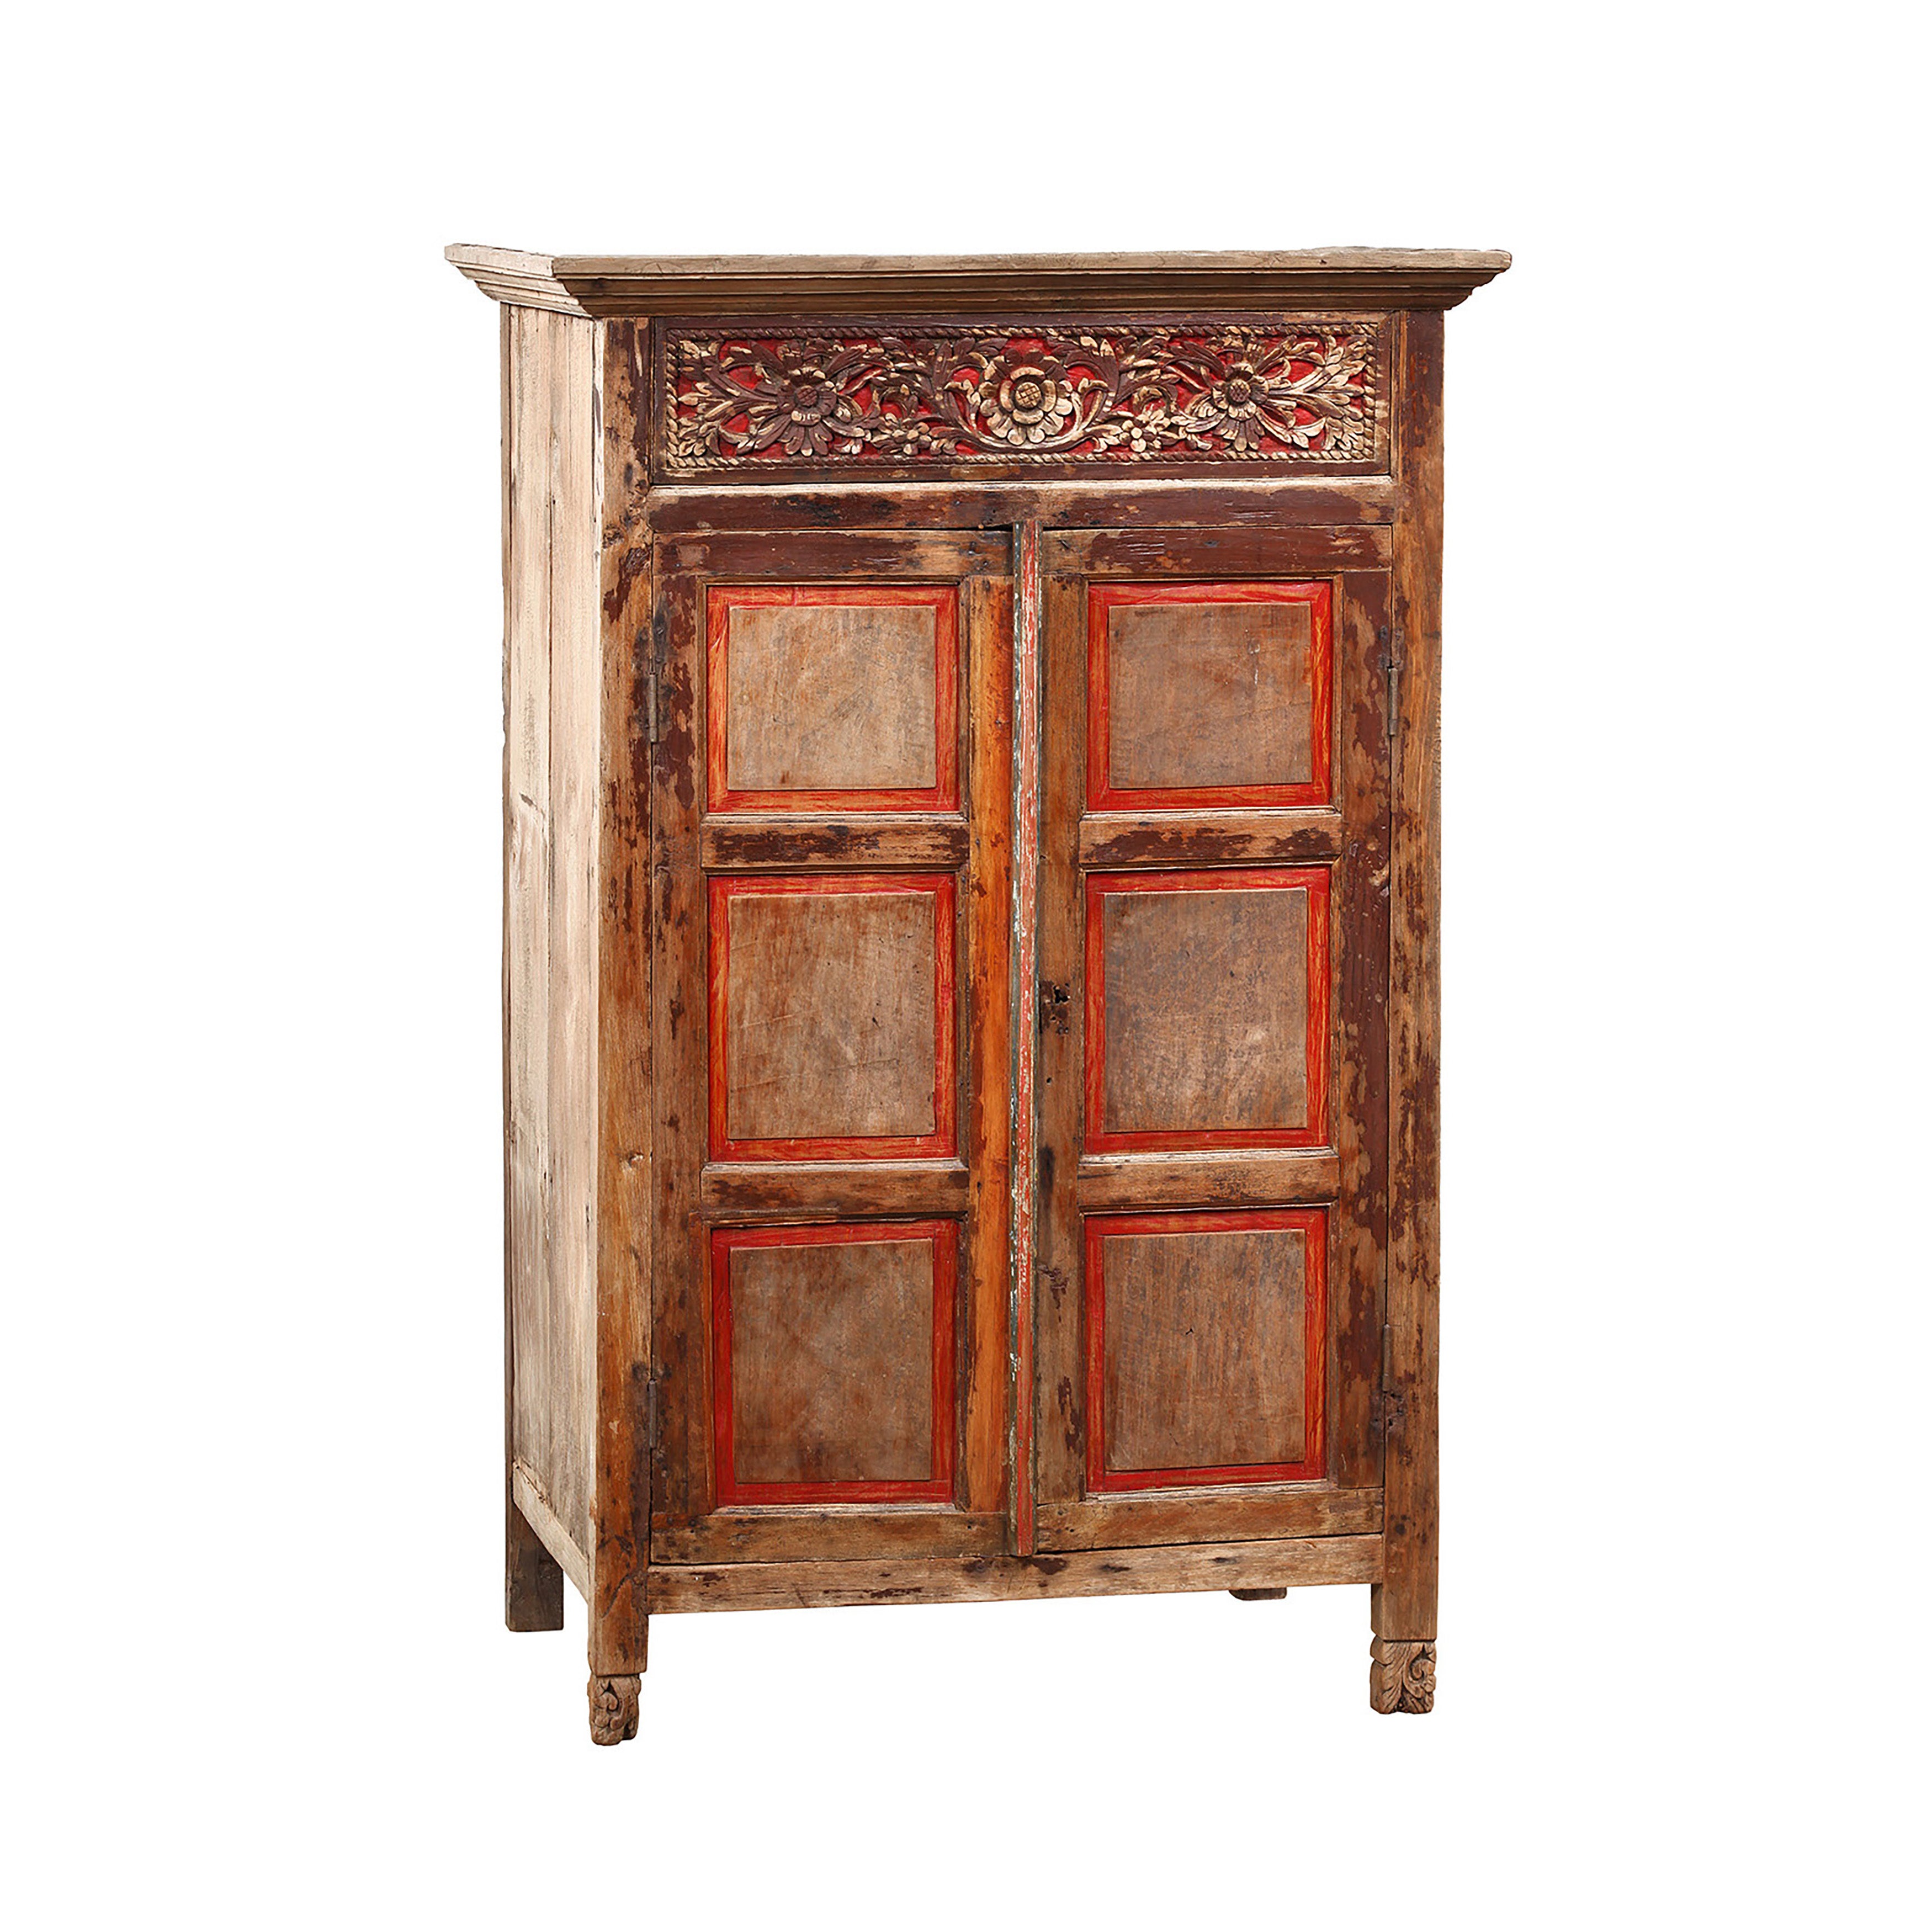 Antique Money Cabinet - What A Room